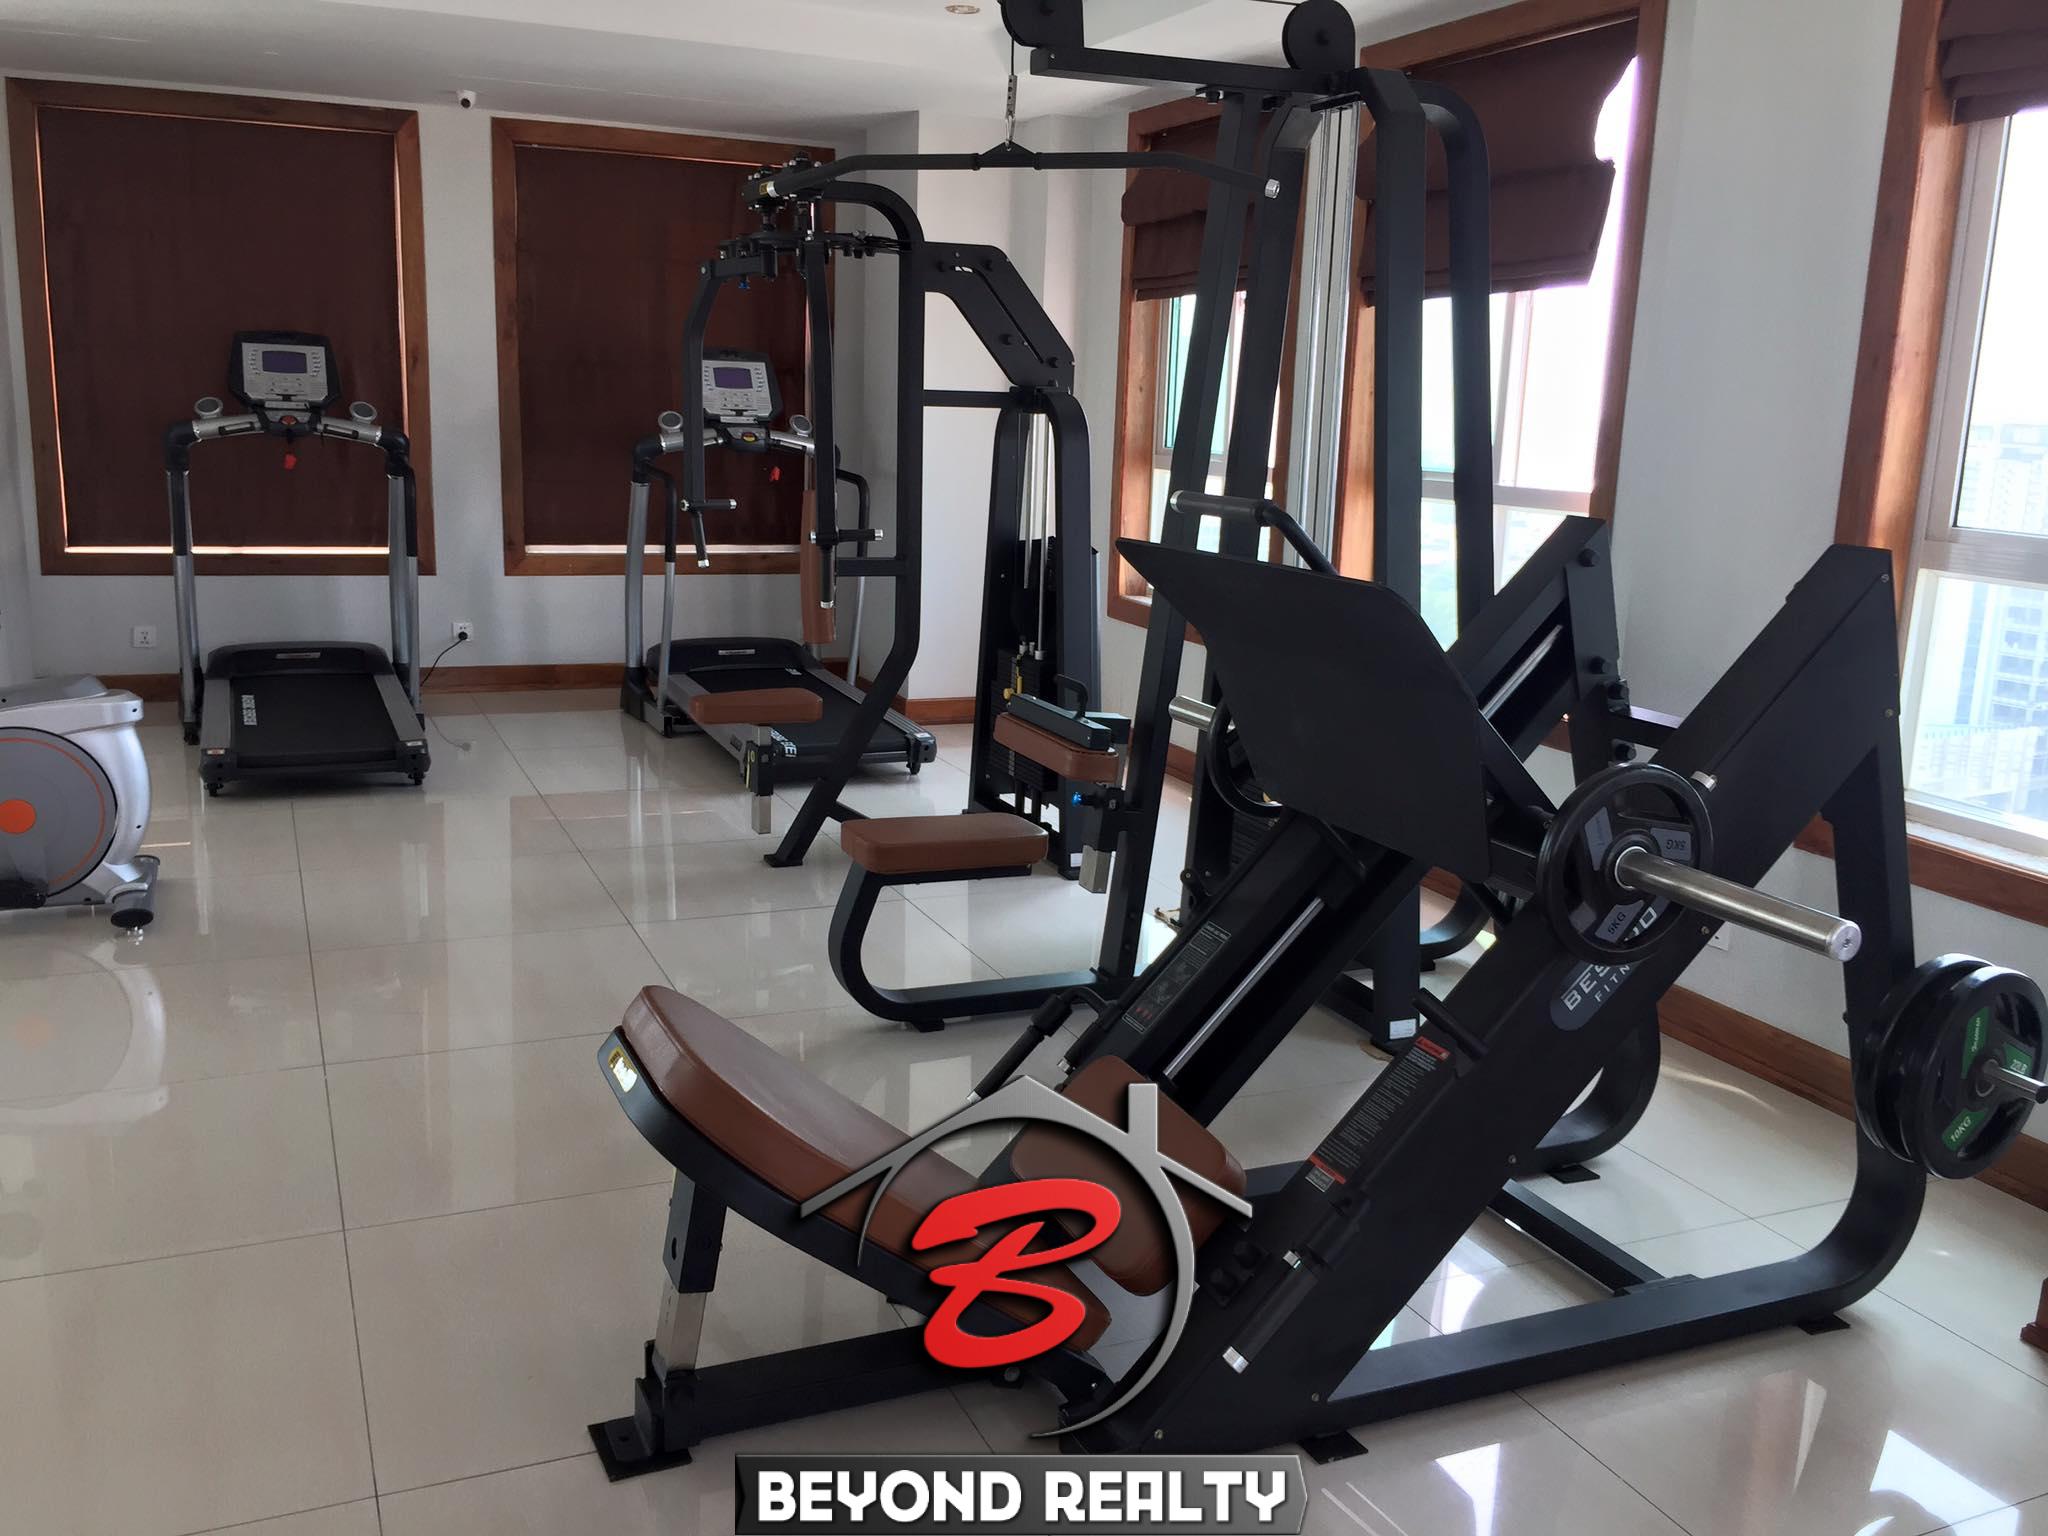 the gym of the serviced apartment for rent in BKK3 in Phnom Penh Cambodia